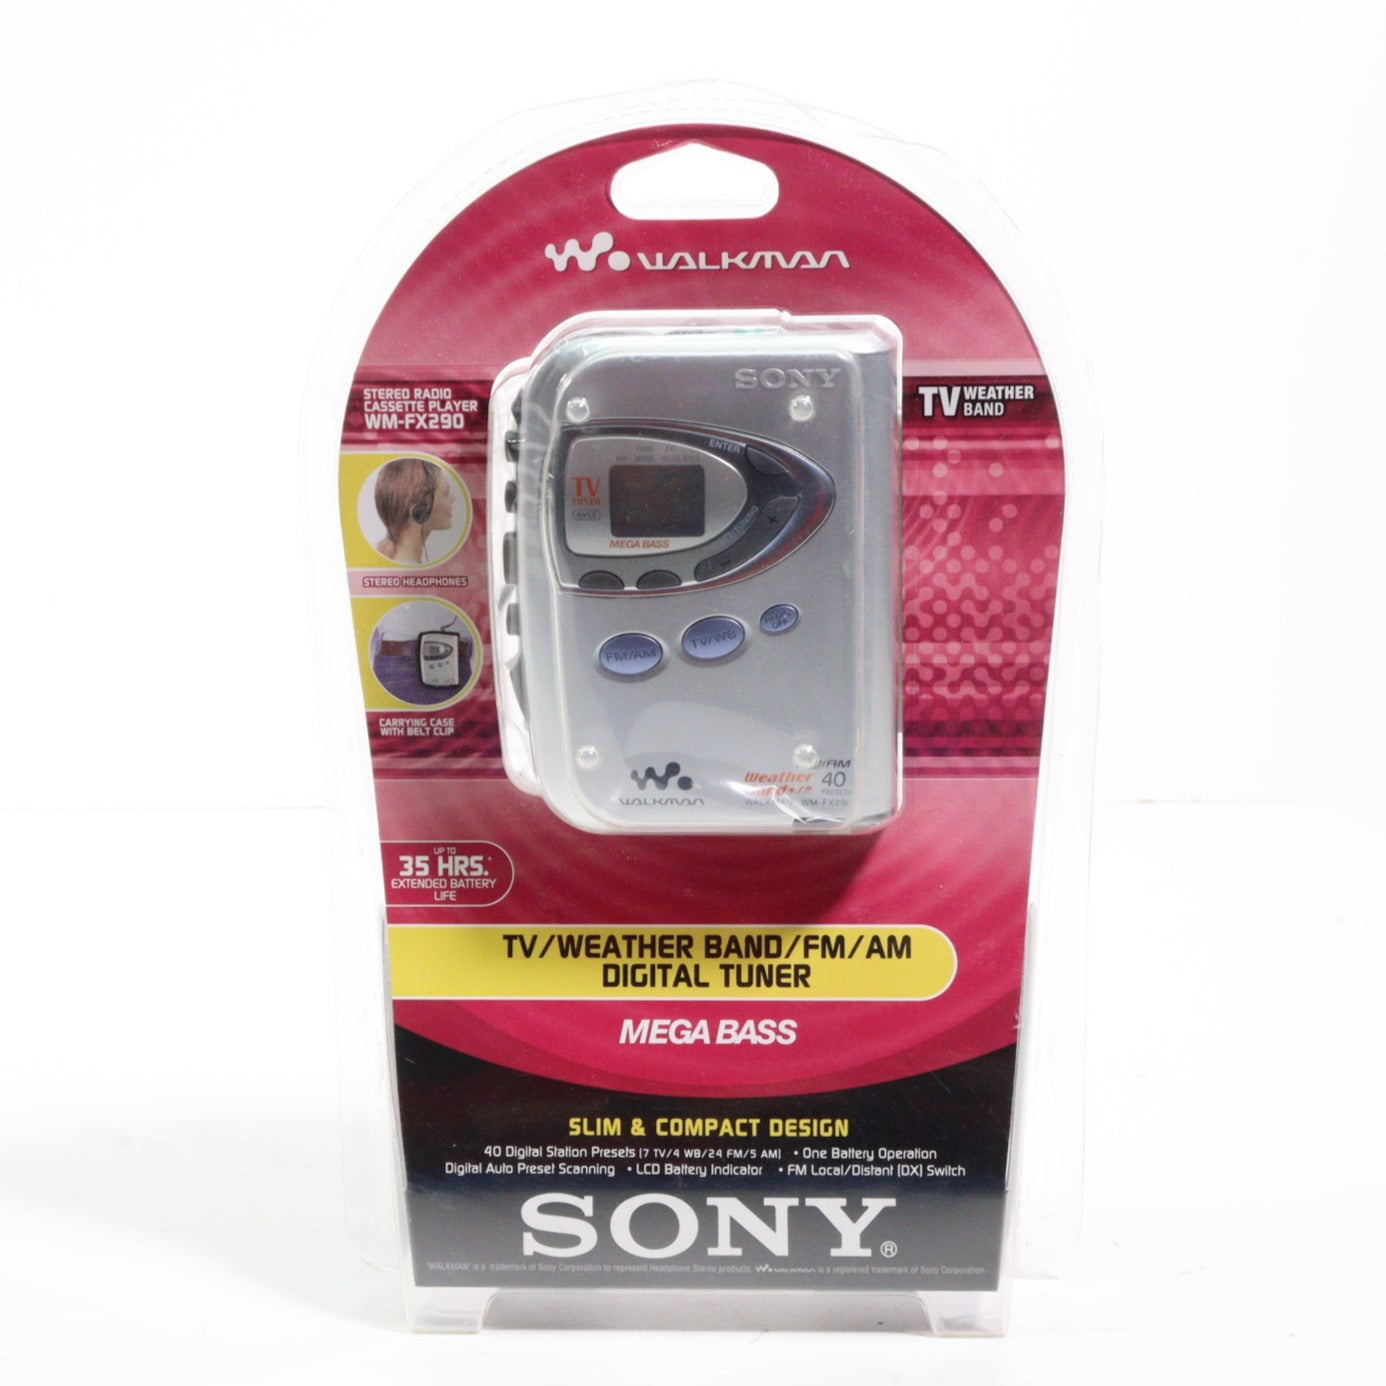 Sony WM-FX290 Portable AM FM Radio and Cassette Player TV Weather Band